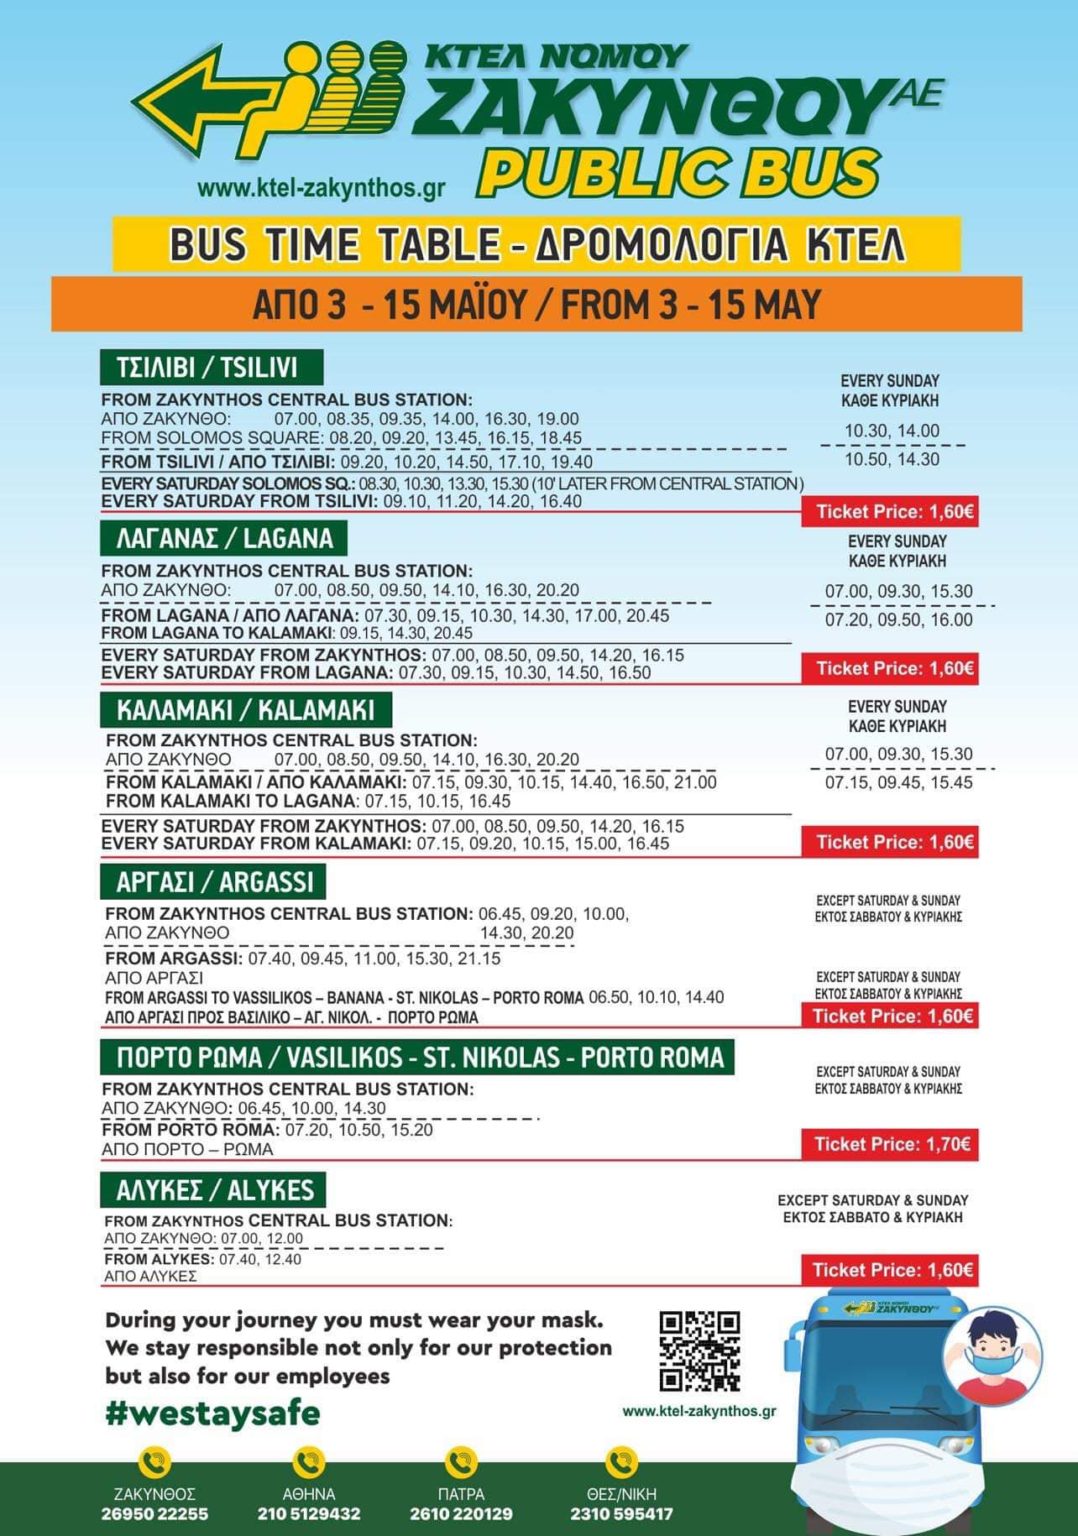 Zakynthos Local bus services timetable for 3rd 15th May